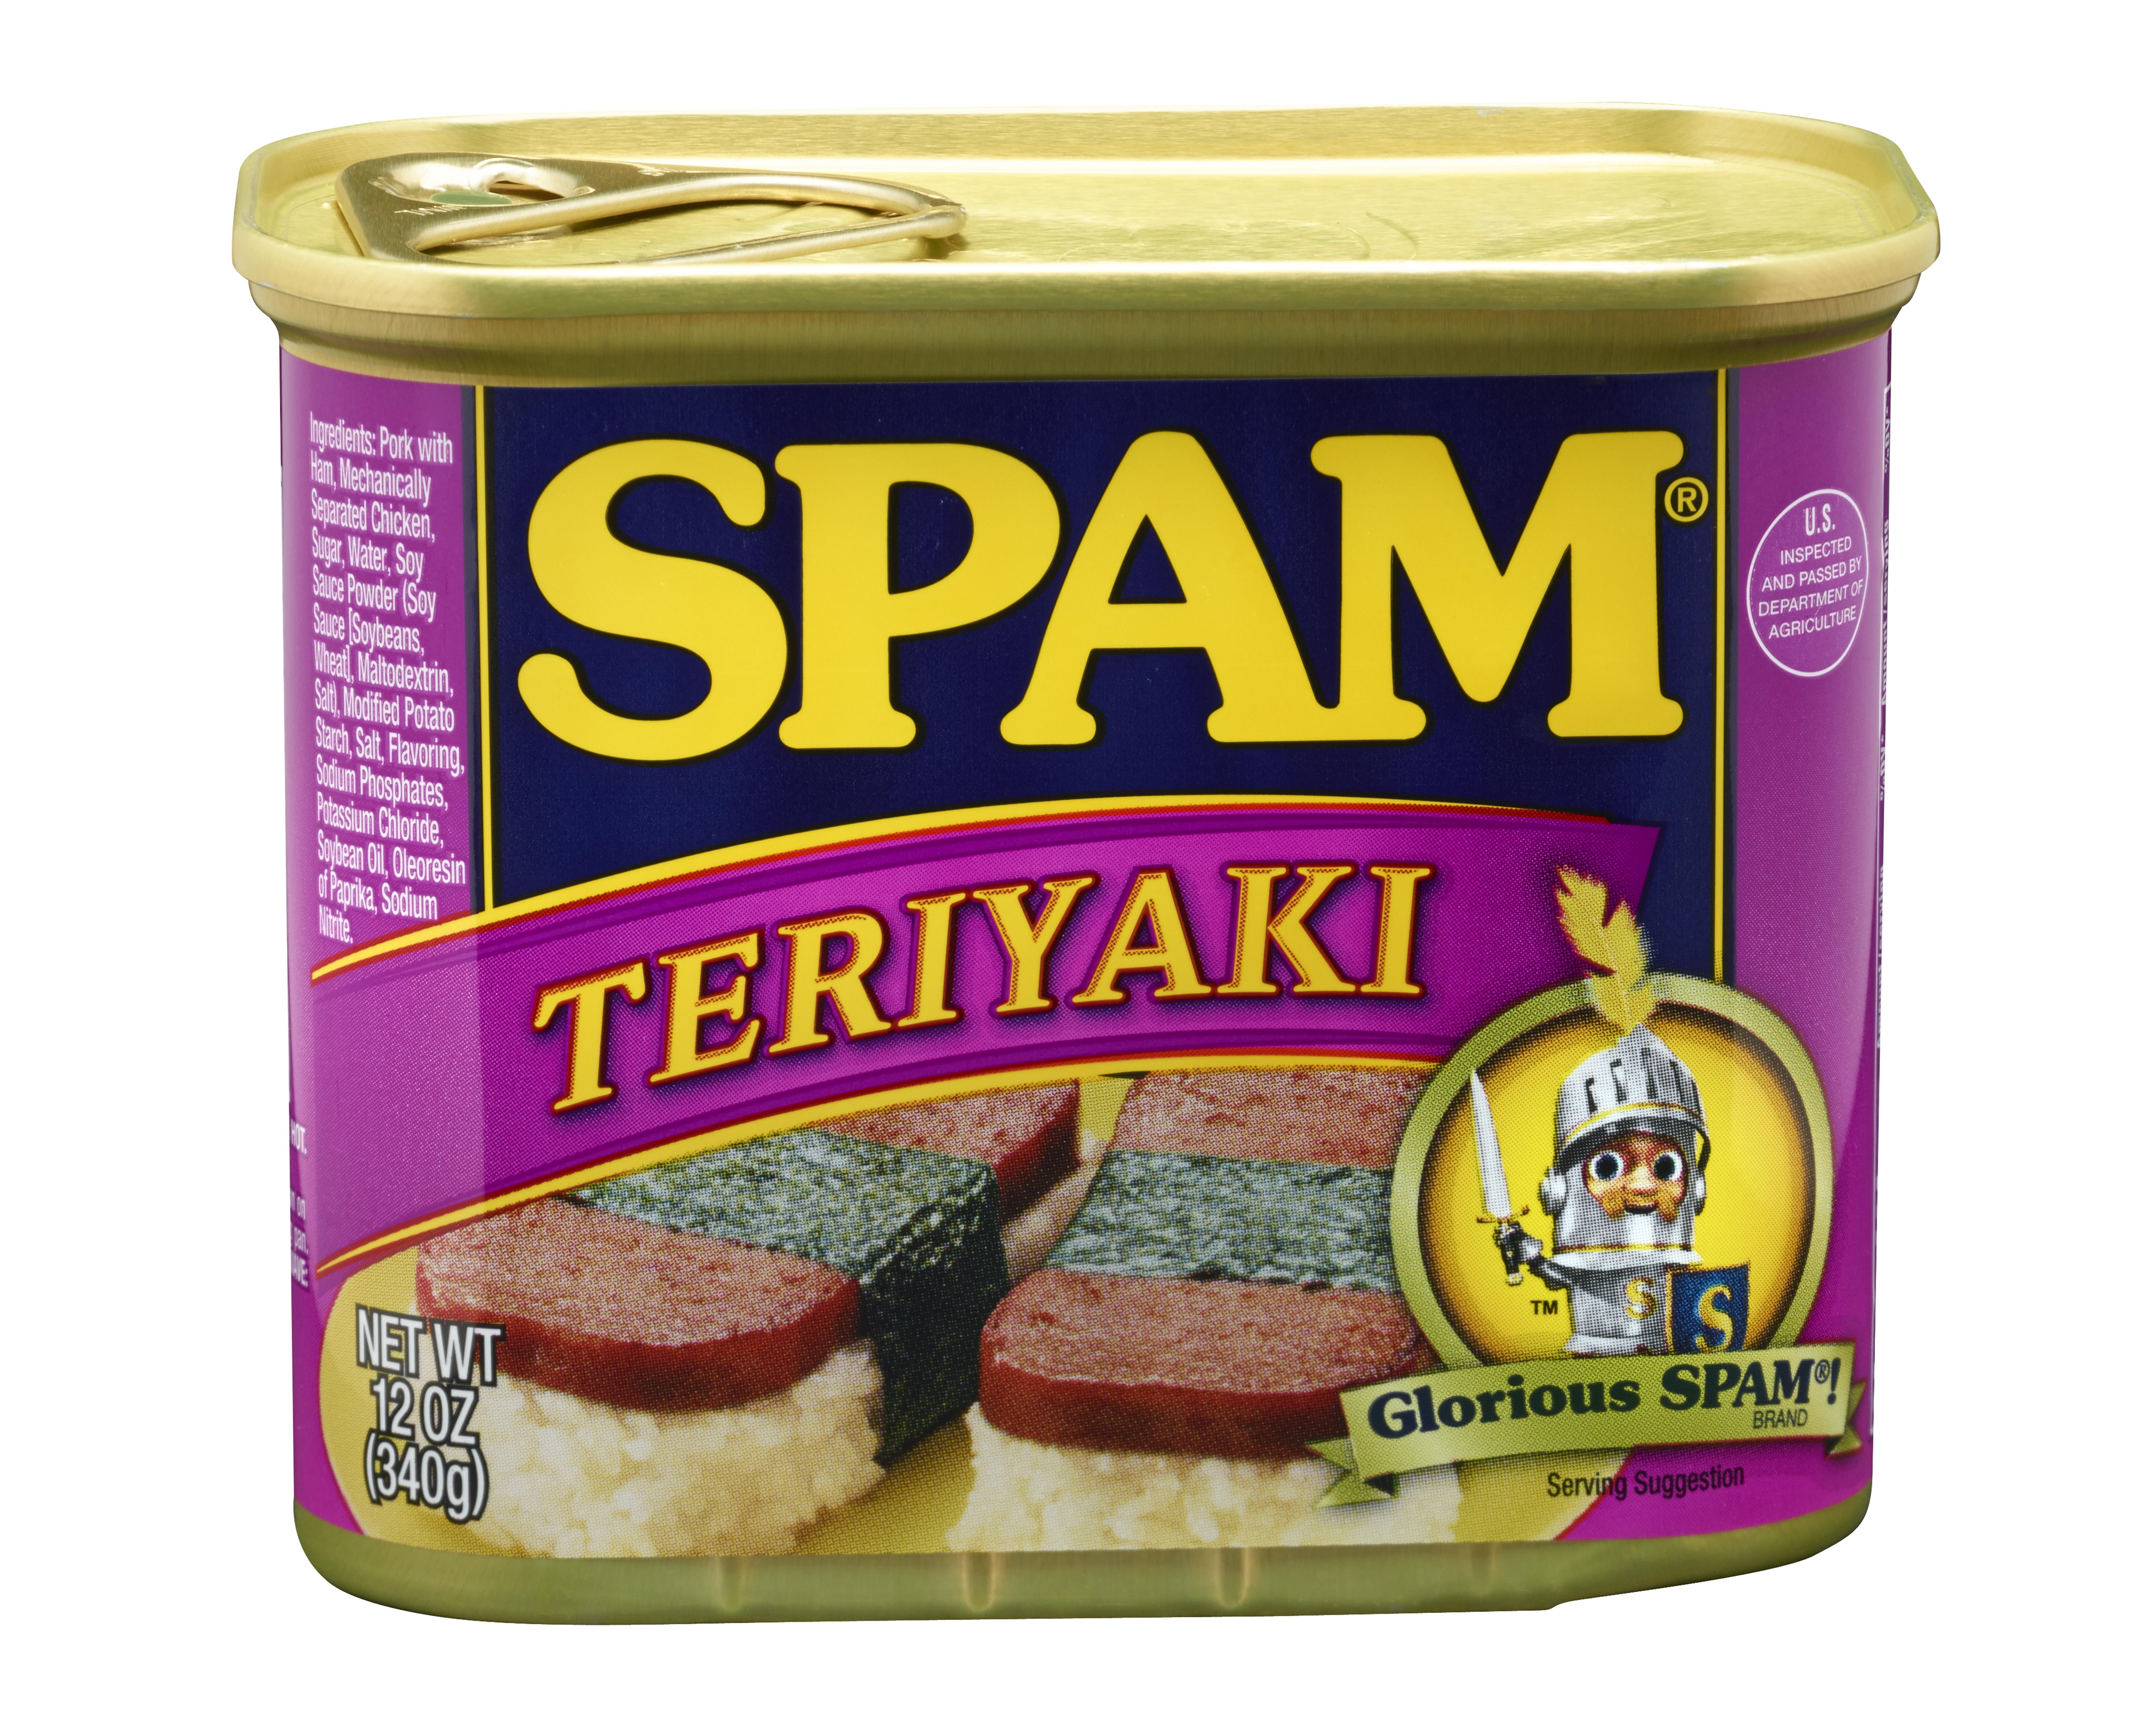 Hawaii gets its own flavor of Spam - Hormel Foods